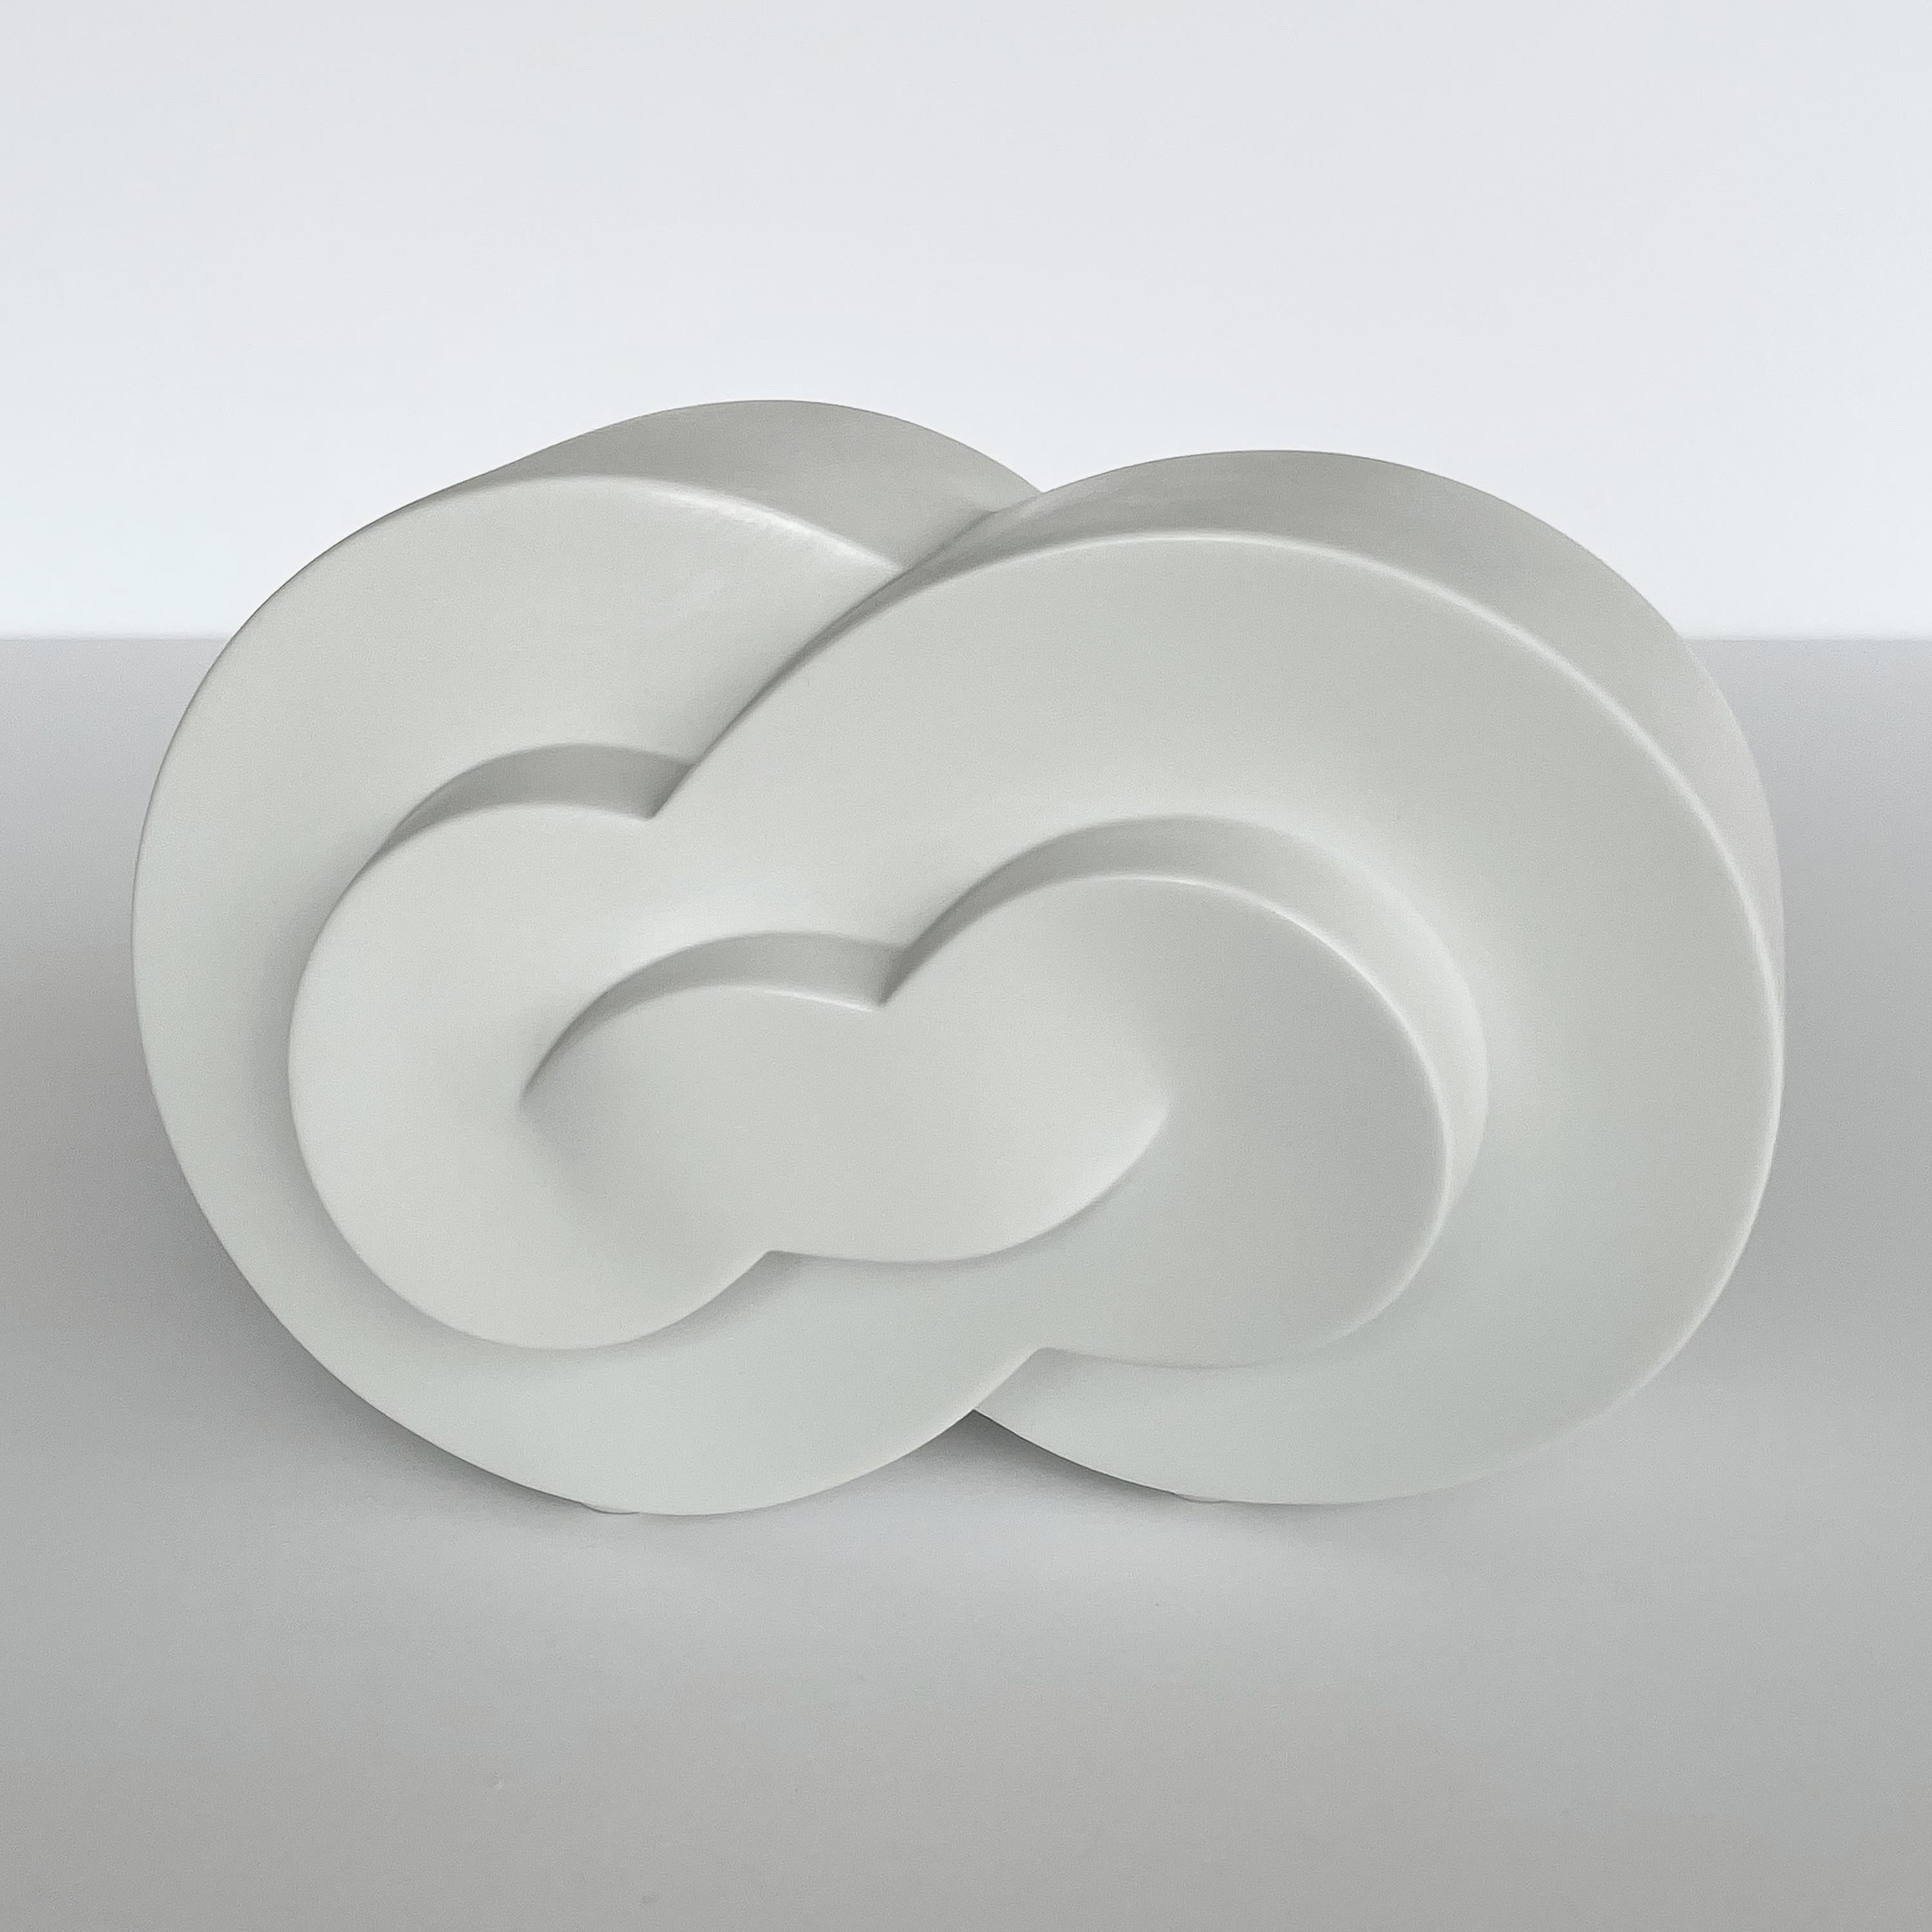 White porcelain abstract sculpture by Natale Sapone for Rosenthal, circa 1975. Abstract cloud-like form. Limited edition produced by Rosenthal and numbered 20 of 500, signed 